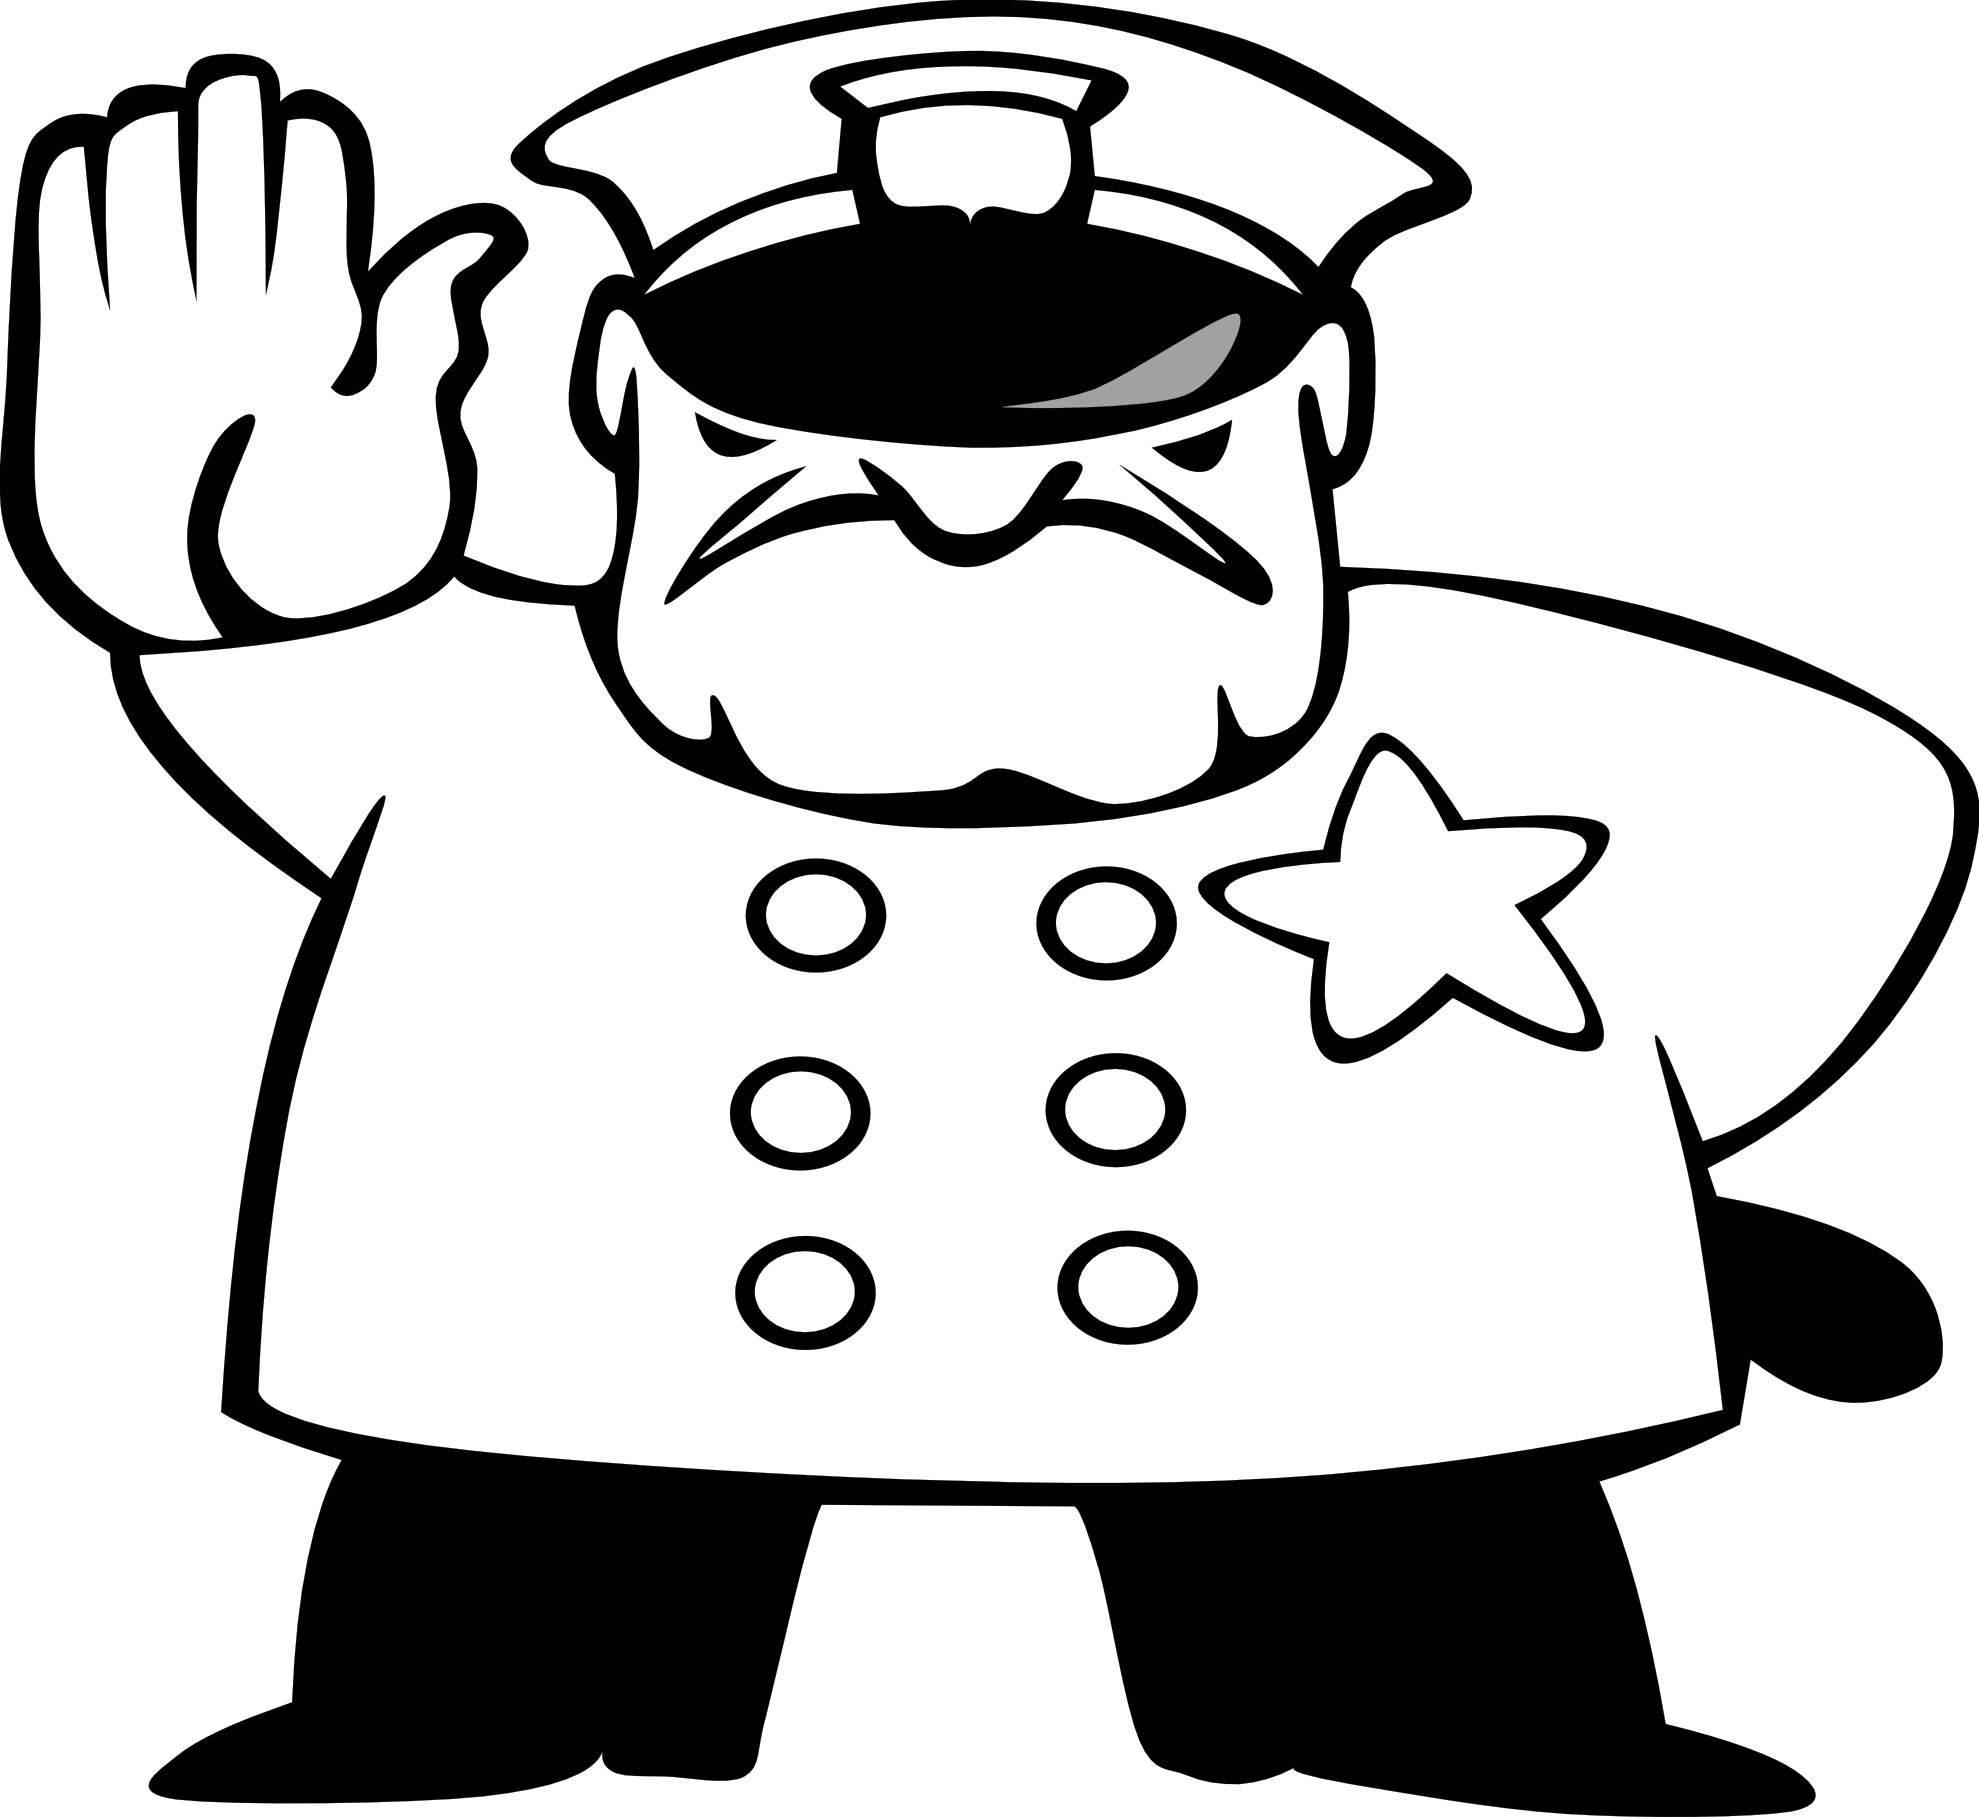 Police Man Black White   Clipart Panda   Free Clipart Images